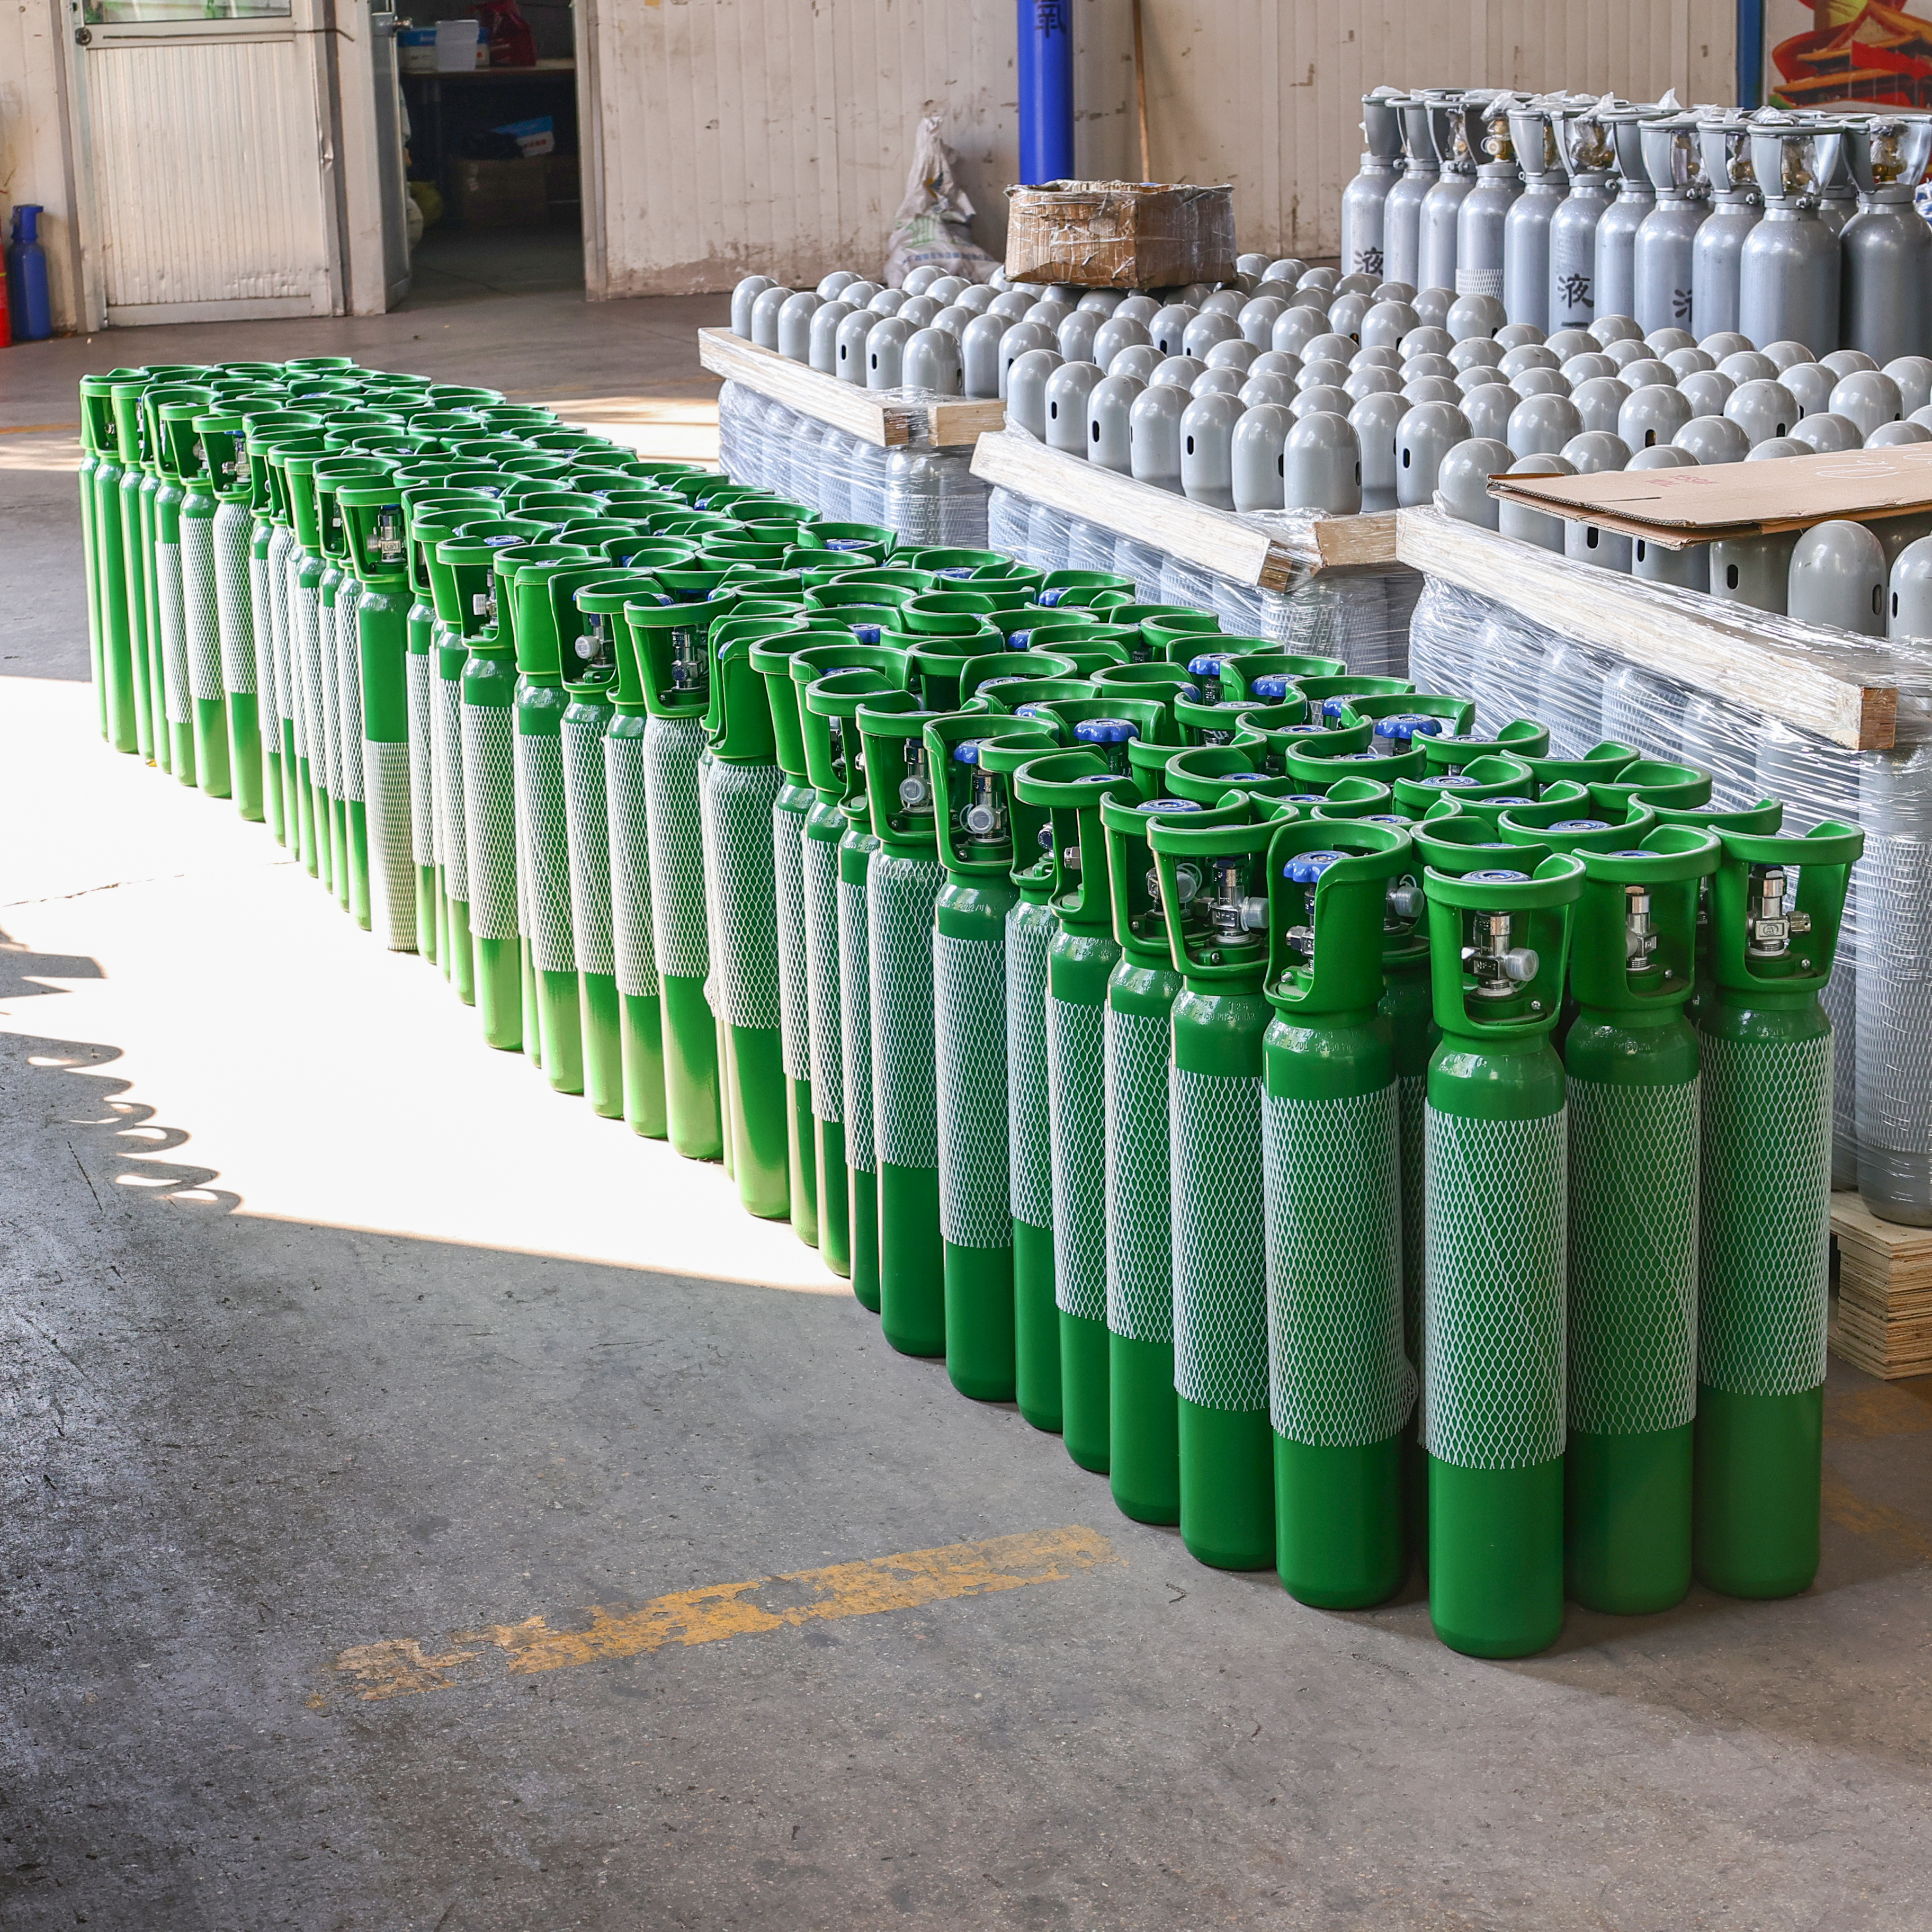 10L 200bar Tped EU Standard Seamless Steel Portable Household Health Care Medical Oxygen Gas Cylinder